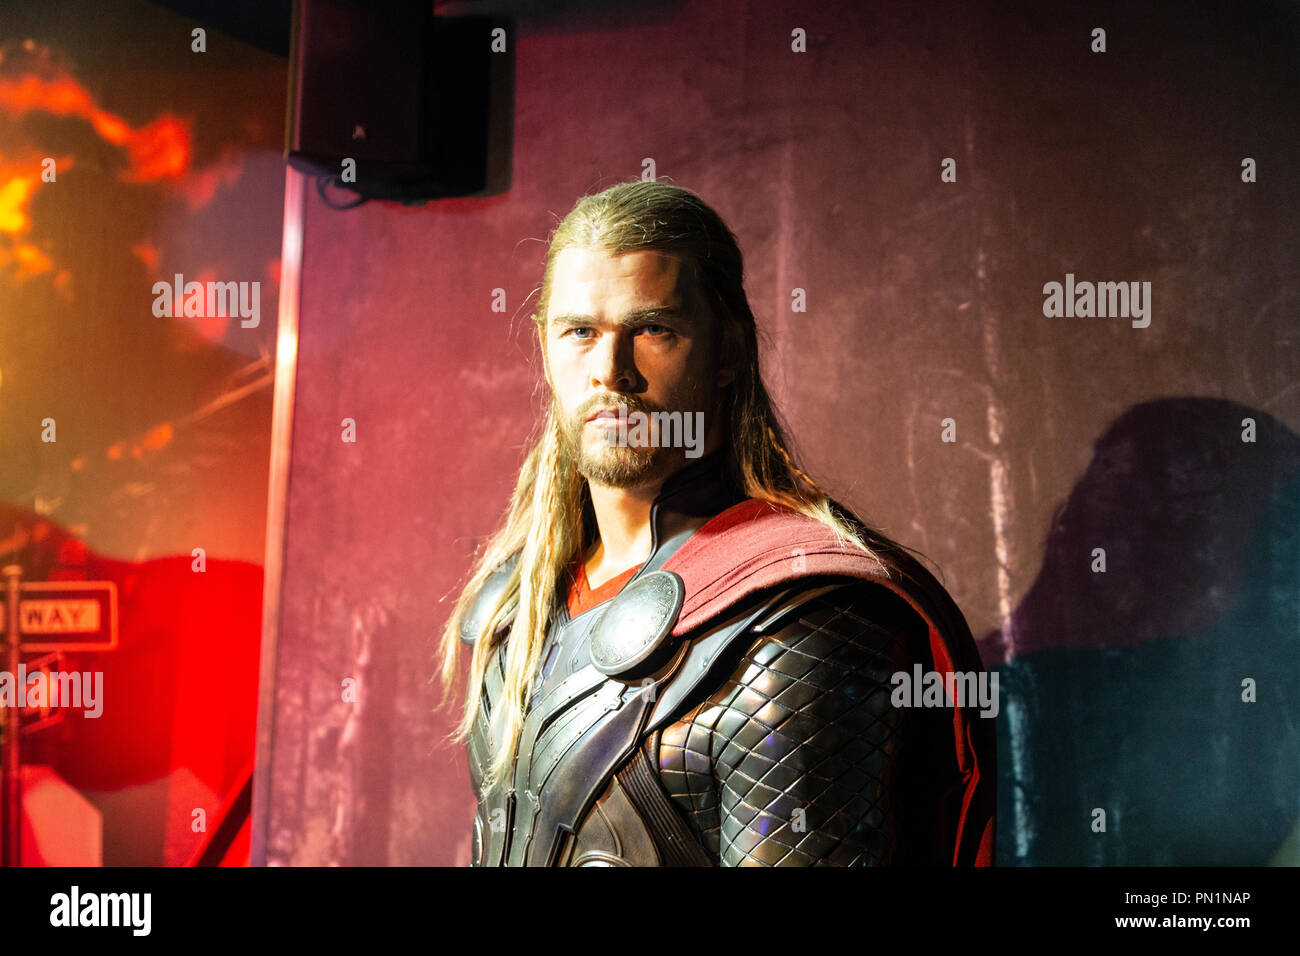 Chris Hemsworth as Thor, Marvel section, Madame Tussauds wax museum in Amsterdam, Netherlands Stock Photo